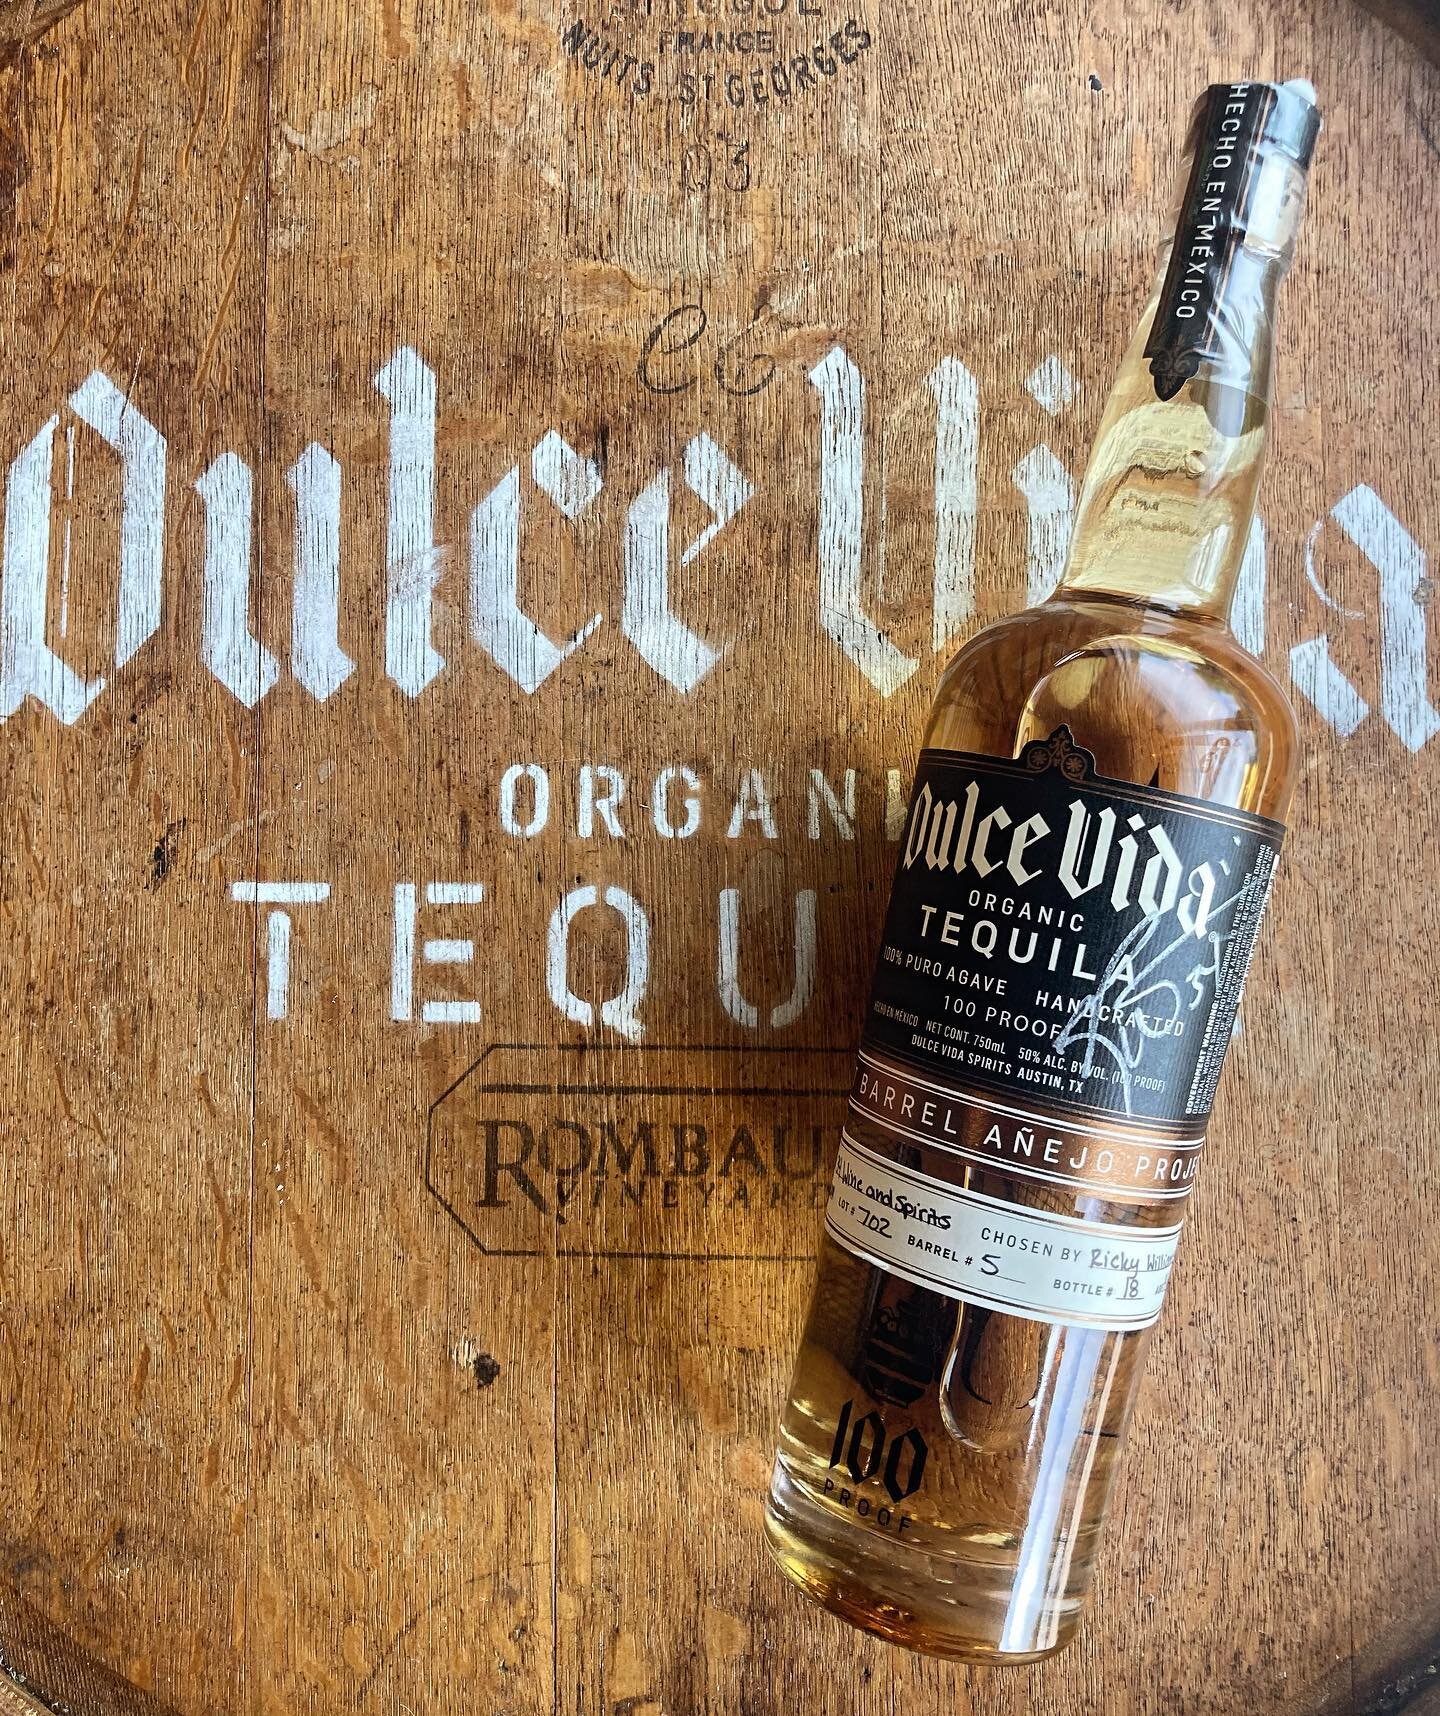 Our @dulcevidatequila Barrel Anejo selected by @williams now available. Aged 14 months in a Beam Distillery barrel provides this tequila with notes of caramel apple blended with hints of fruity agave.
-
-
-
#tequila #dulvevida #margarita #liquor #ane